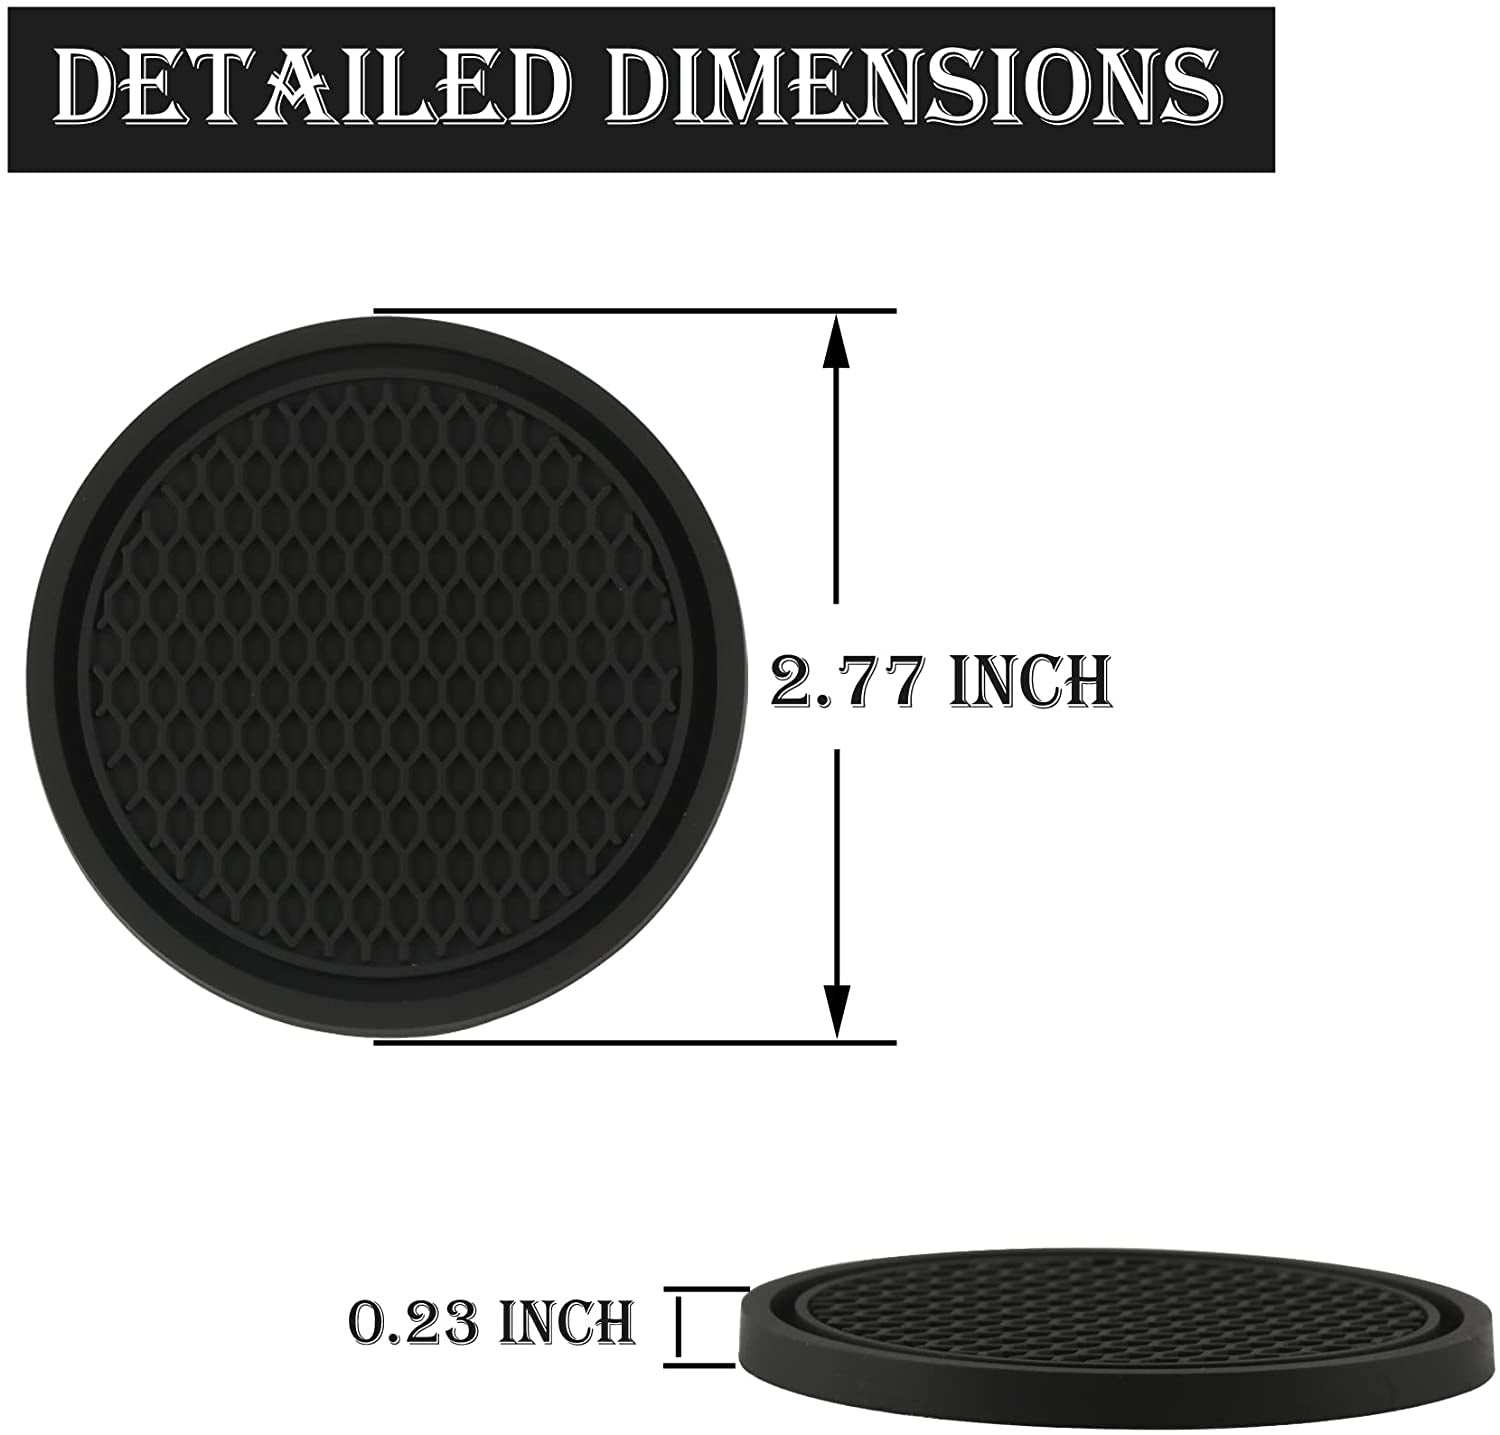 4PCS Universal Non-Slip Car Cup Coasters with Ornament Embedded Design, Black - Car Interior Accessories